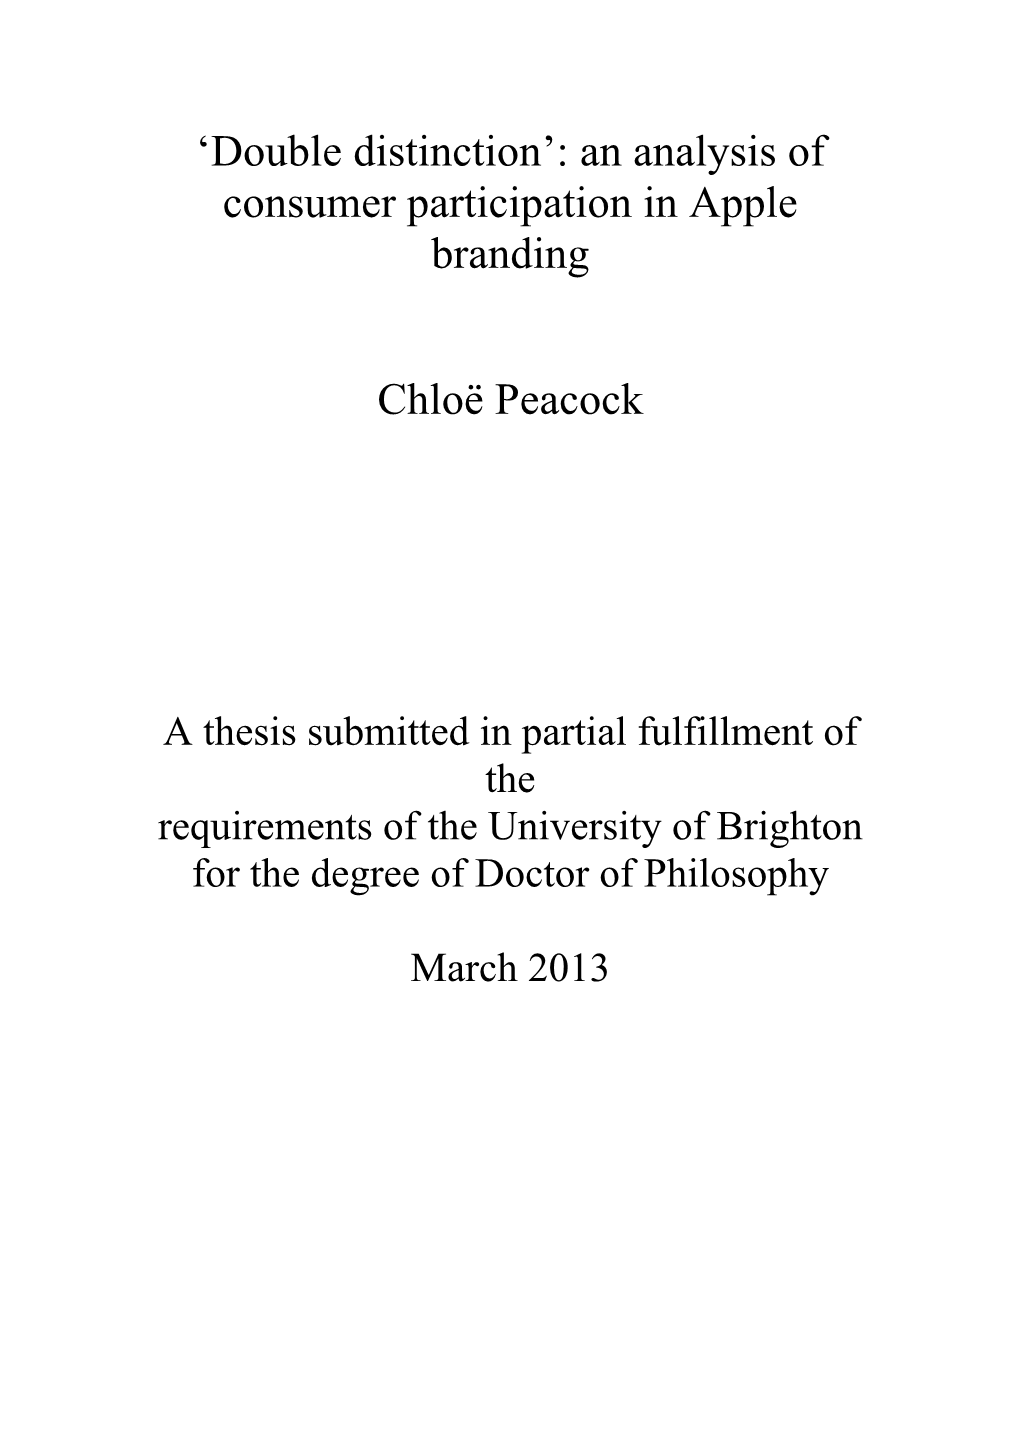 An Analysis of Consumer Participation in Apple Branding Chloë Peacock